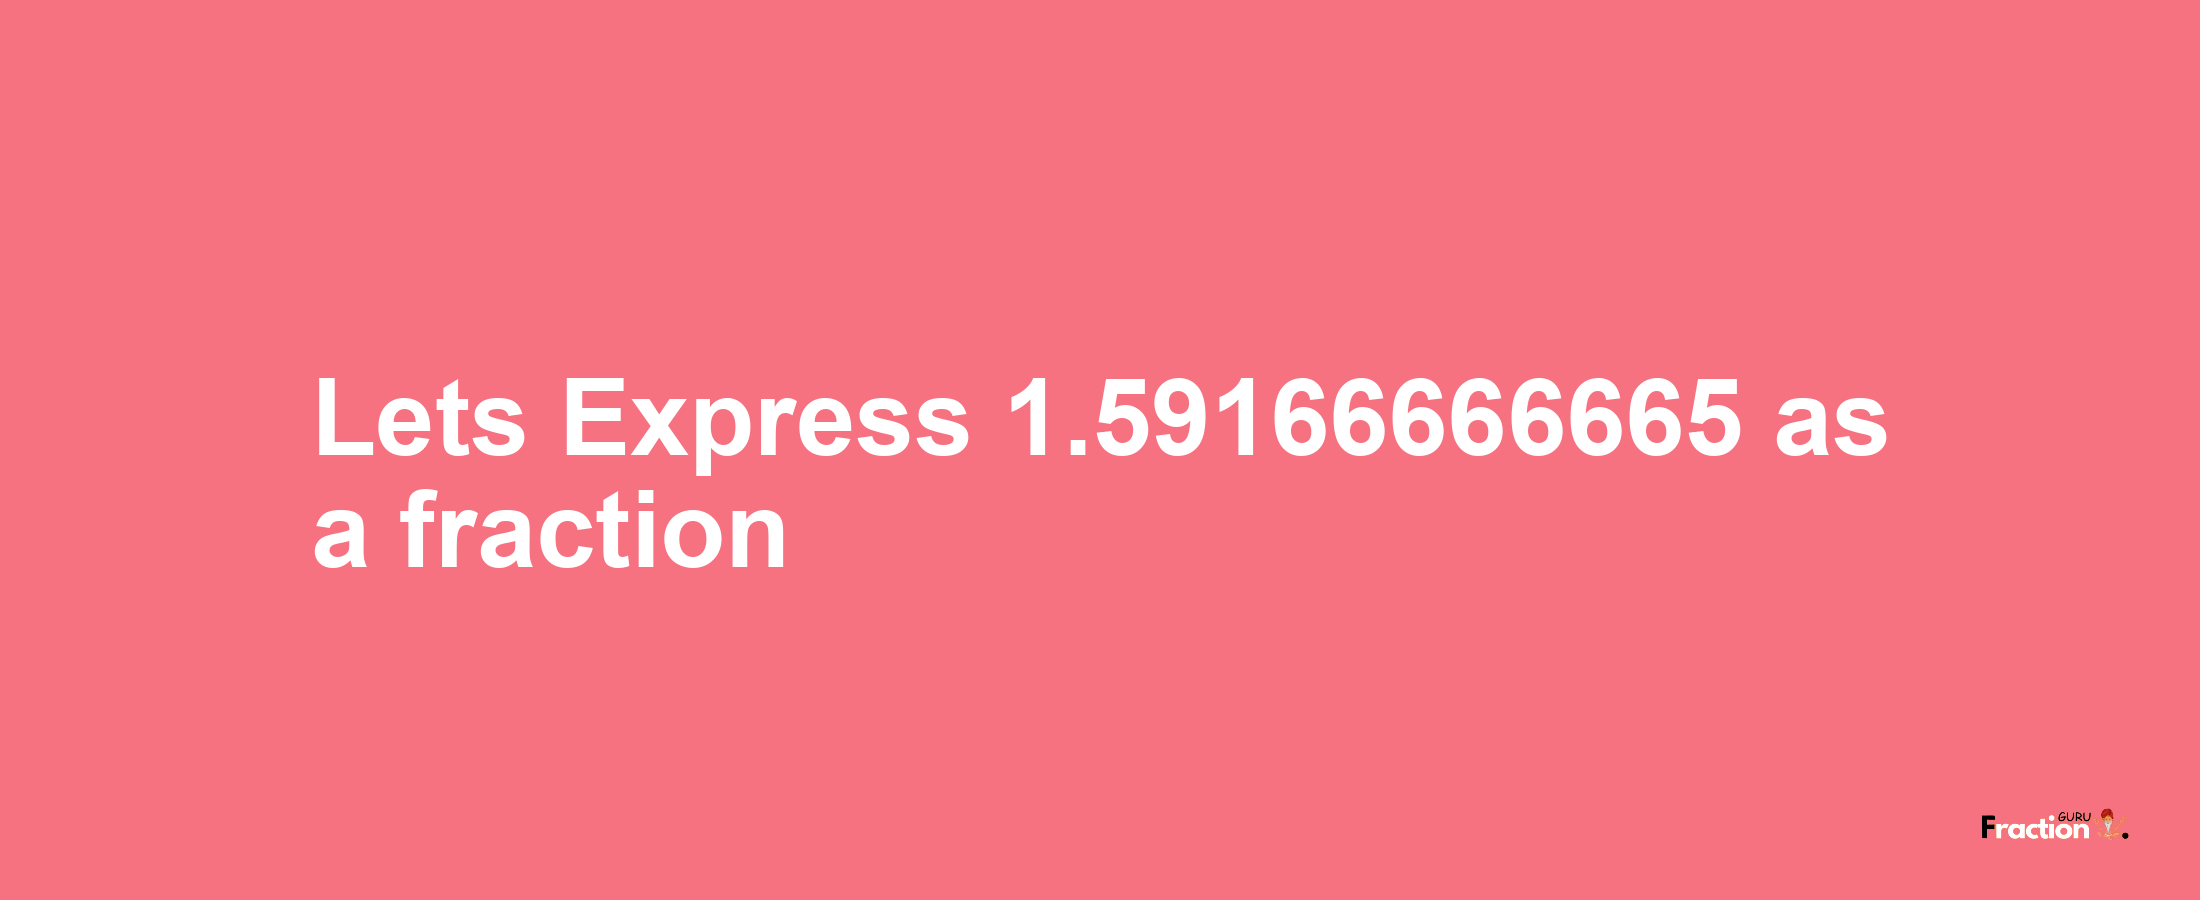 Lets Express 1.59166666665 as afraction